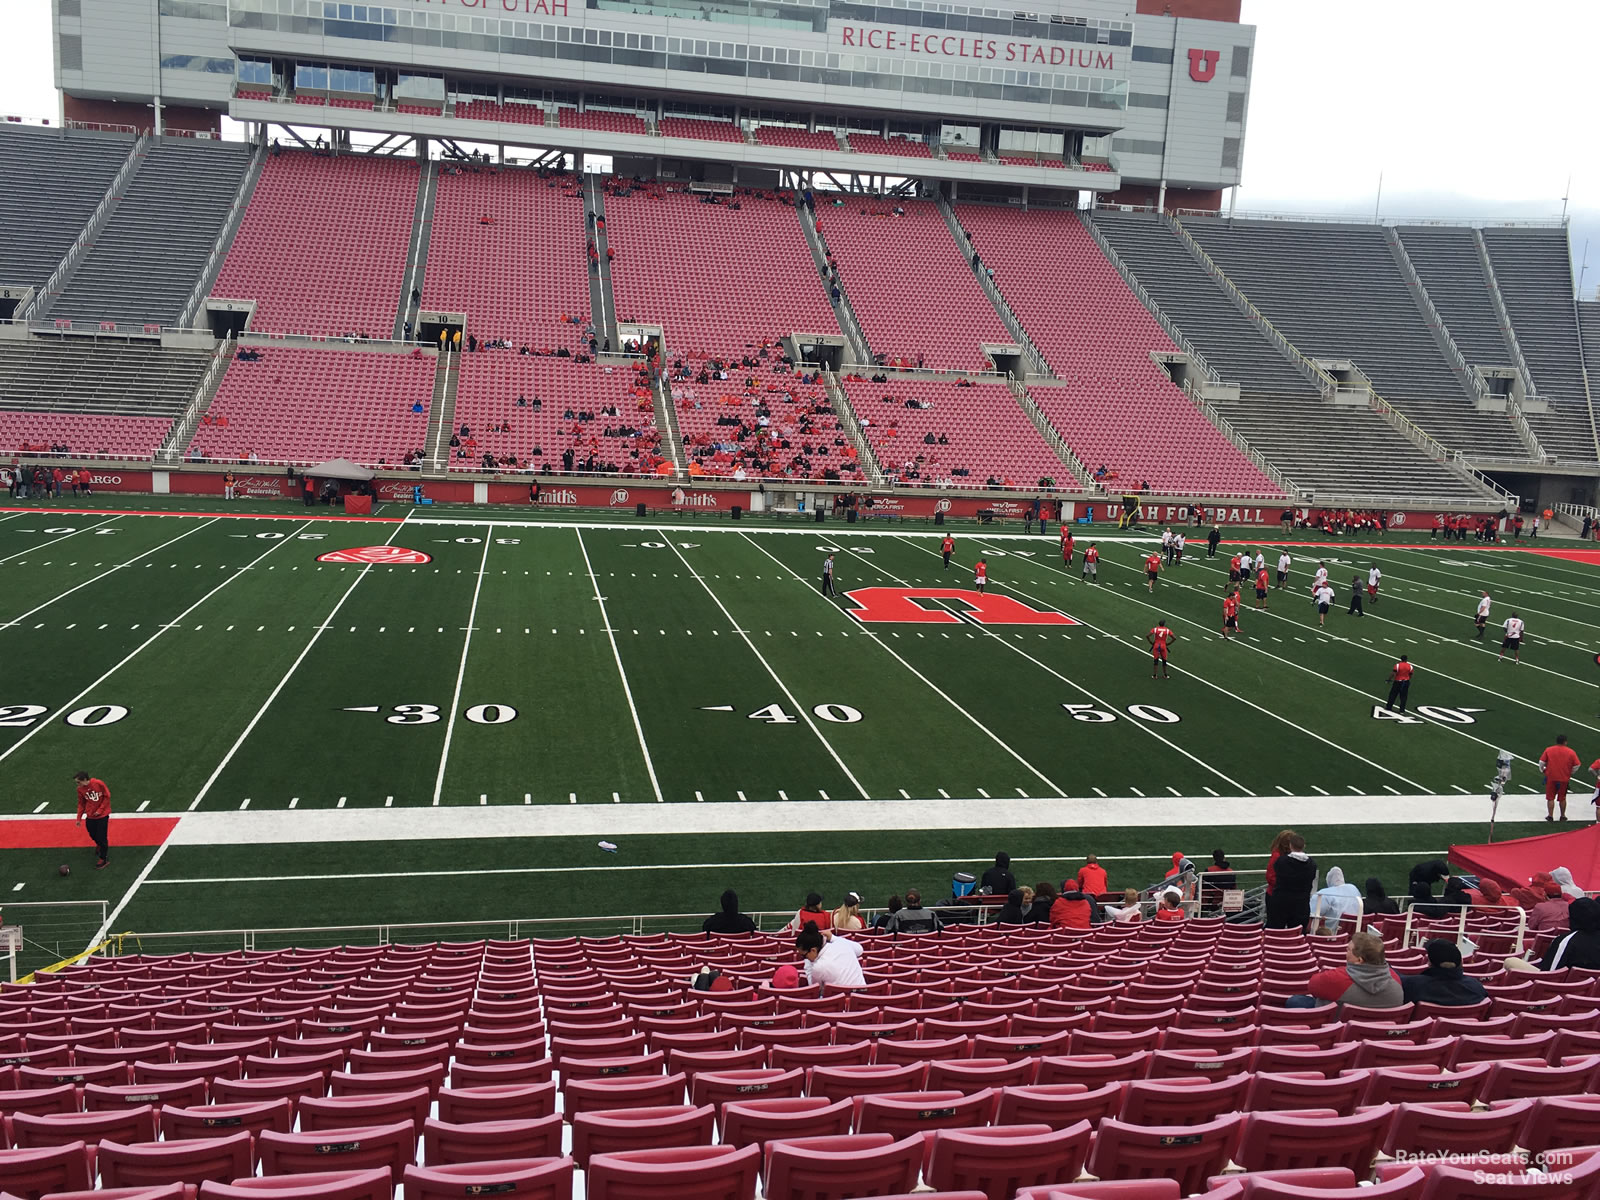 section e37, row 20 seat view  - rice-eccles stadium